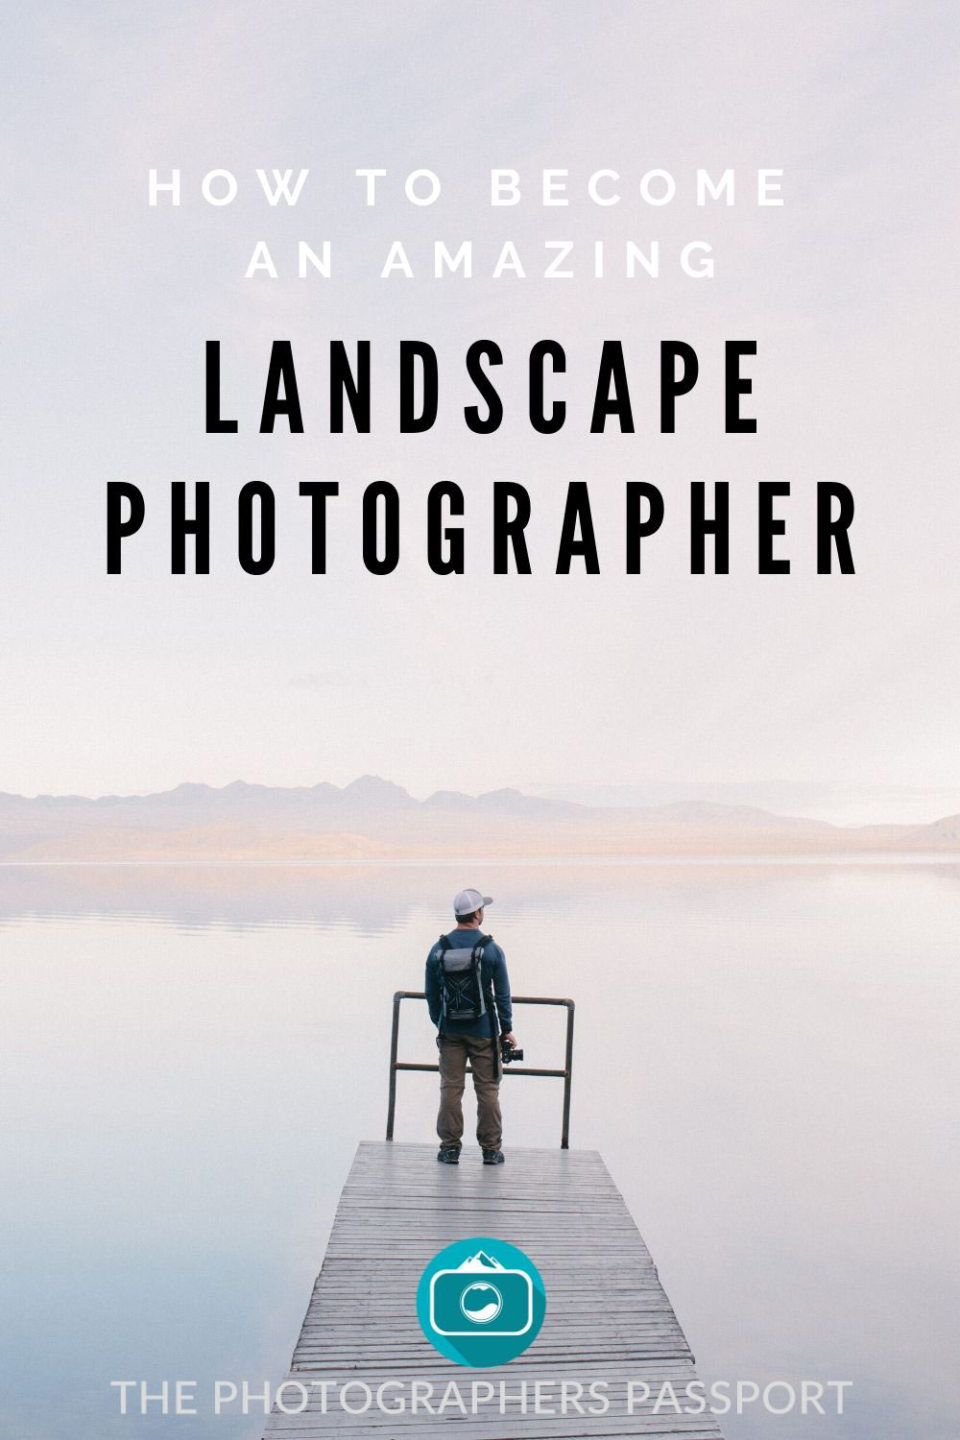 Do you want to learn how you can become an amazing landscape photographer? If so, check out this great article that explains all.